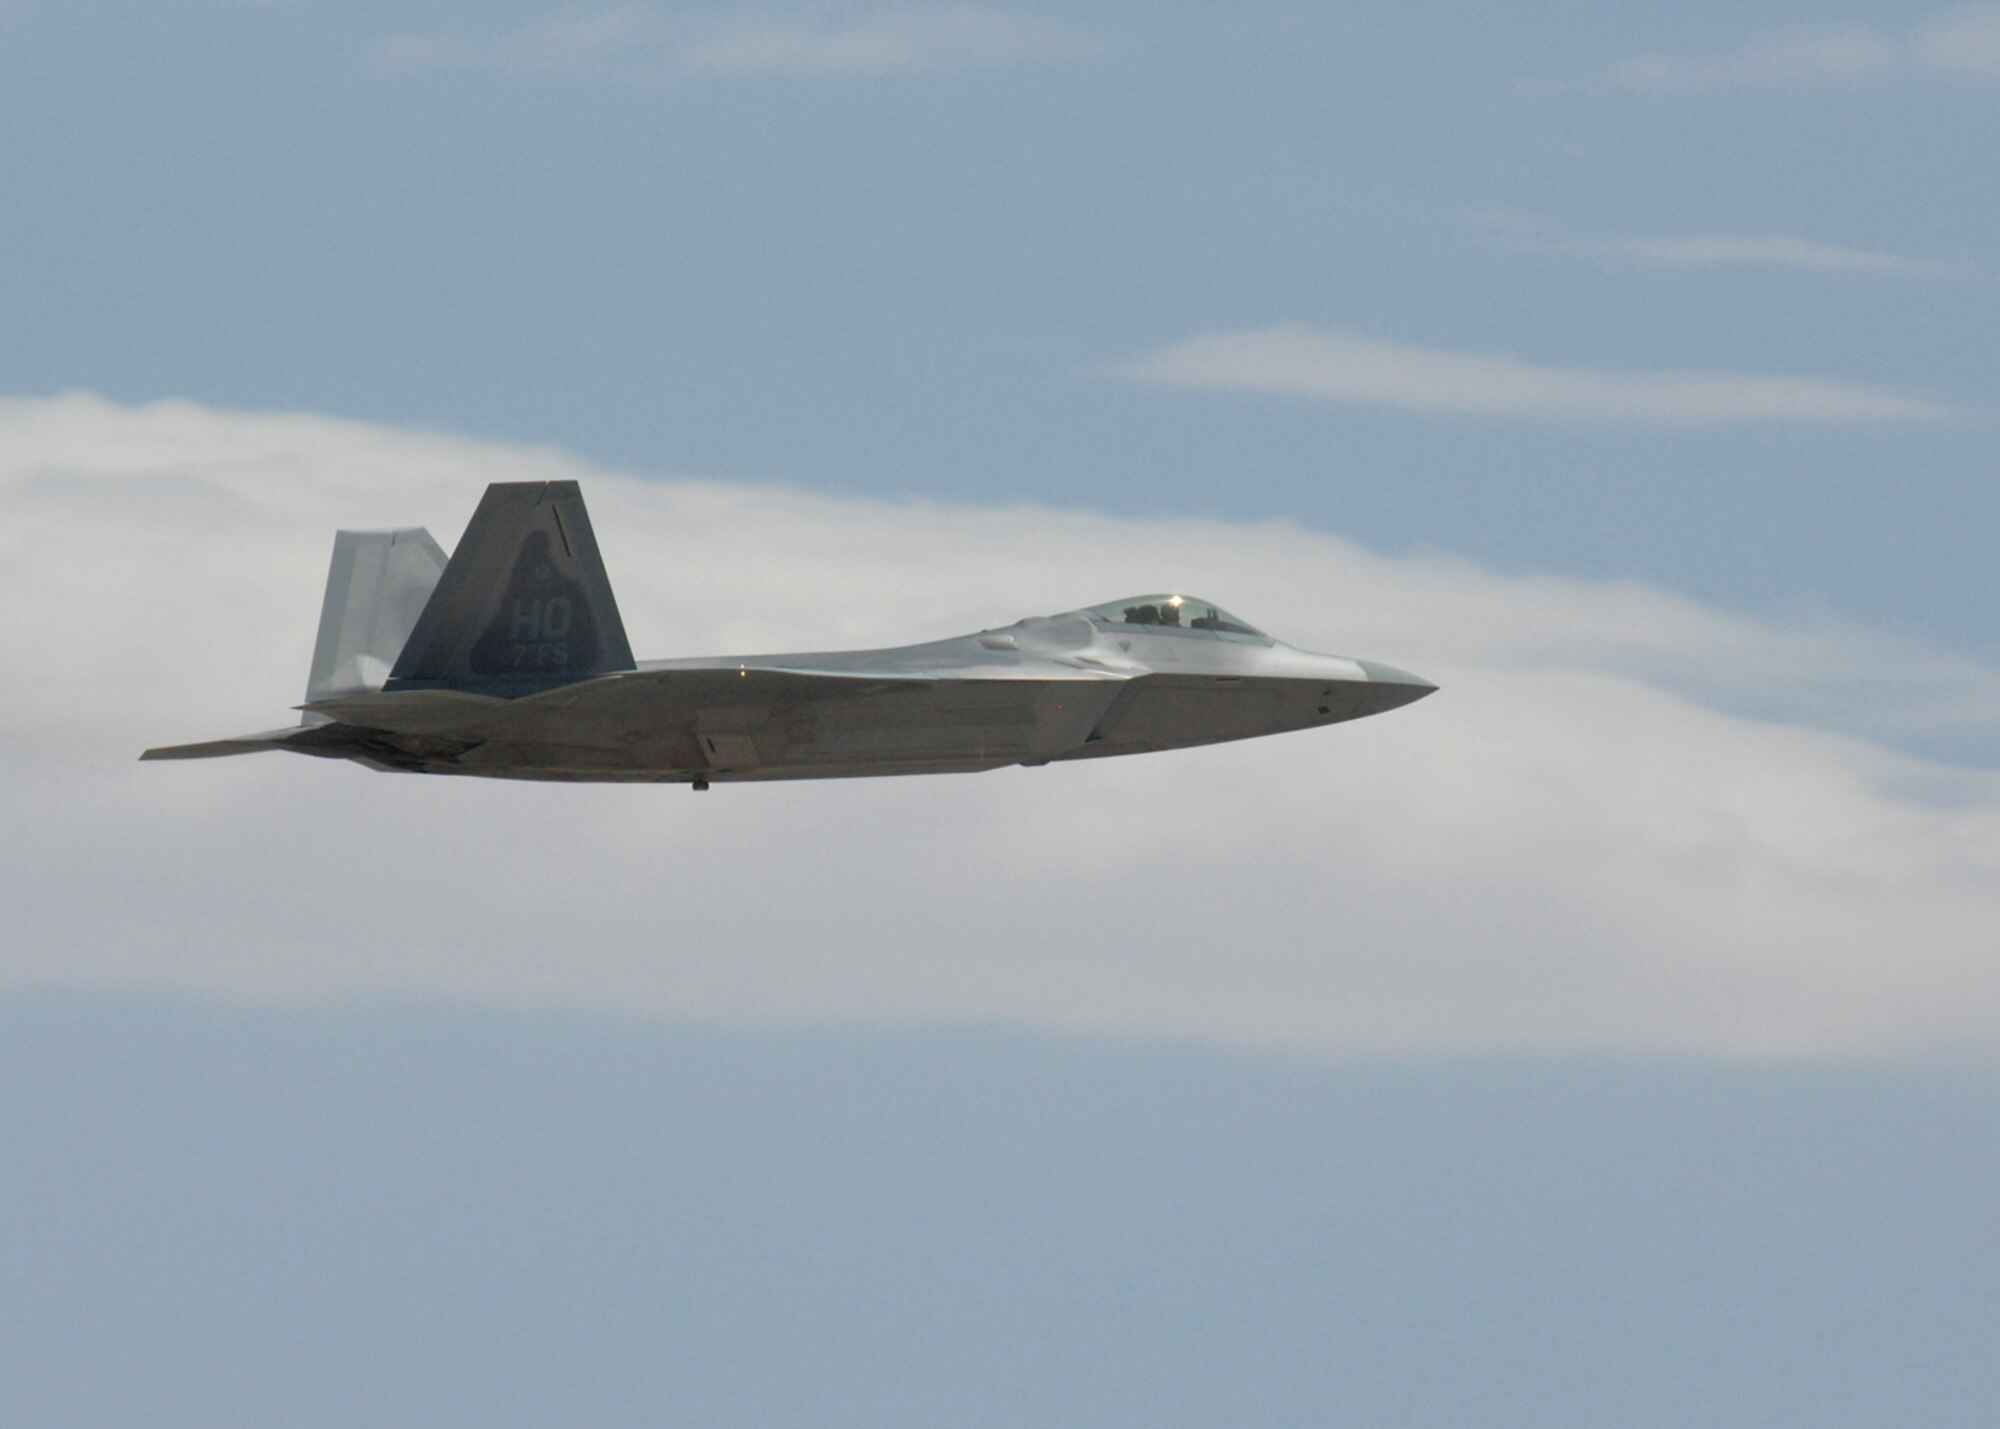 One of two F-22A Raptors fly over Holloman Air Force Base, N.M., June 2. The jets are the first two Holloman-tailed F-22s to arrive on base. Prior to landing, the jets flew over the Tularosa Basin, allowing the local community a chance to witness the future of Holloman. (U.S. Air Force photo/Senior Airman Tiffany Trojca)